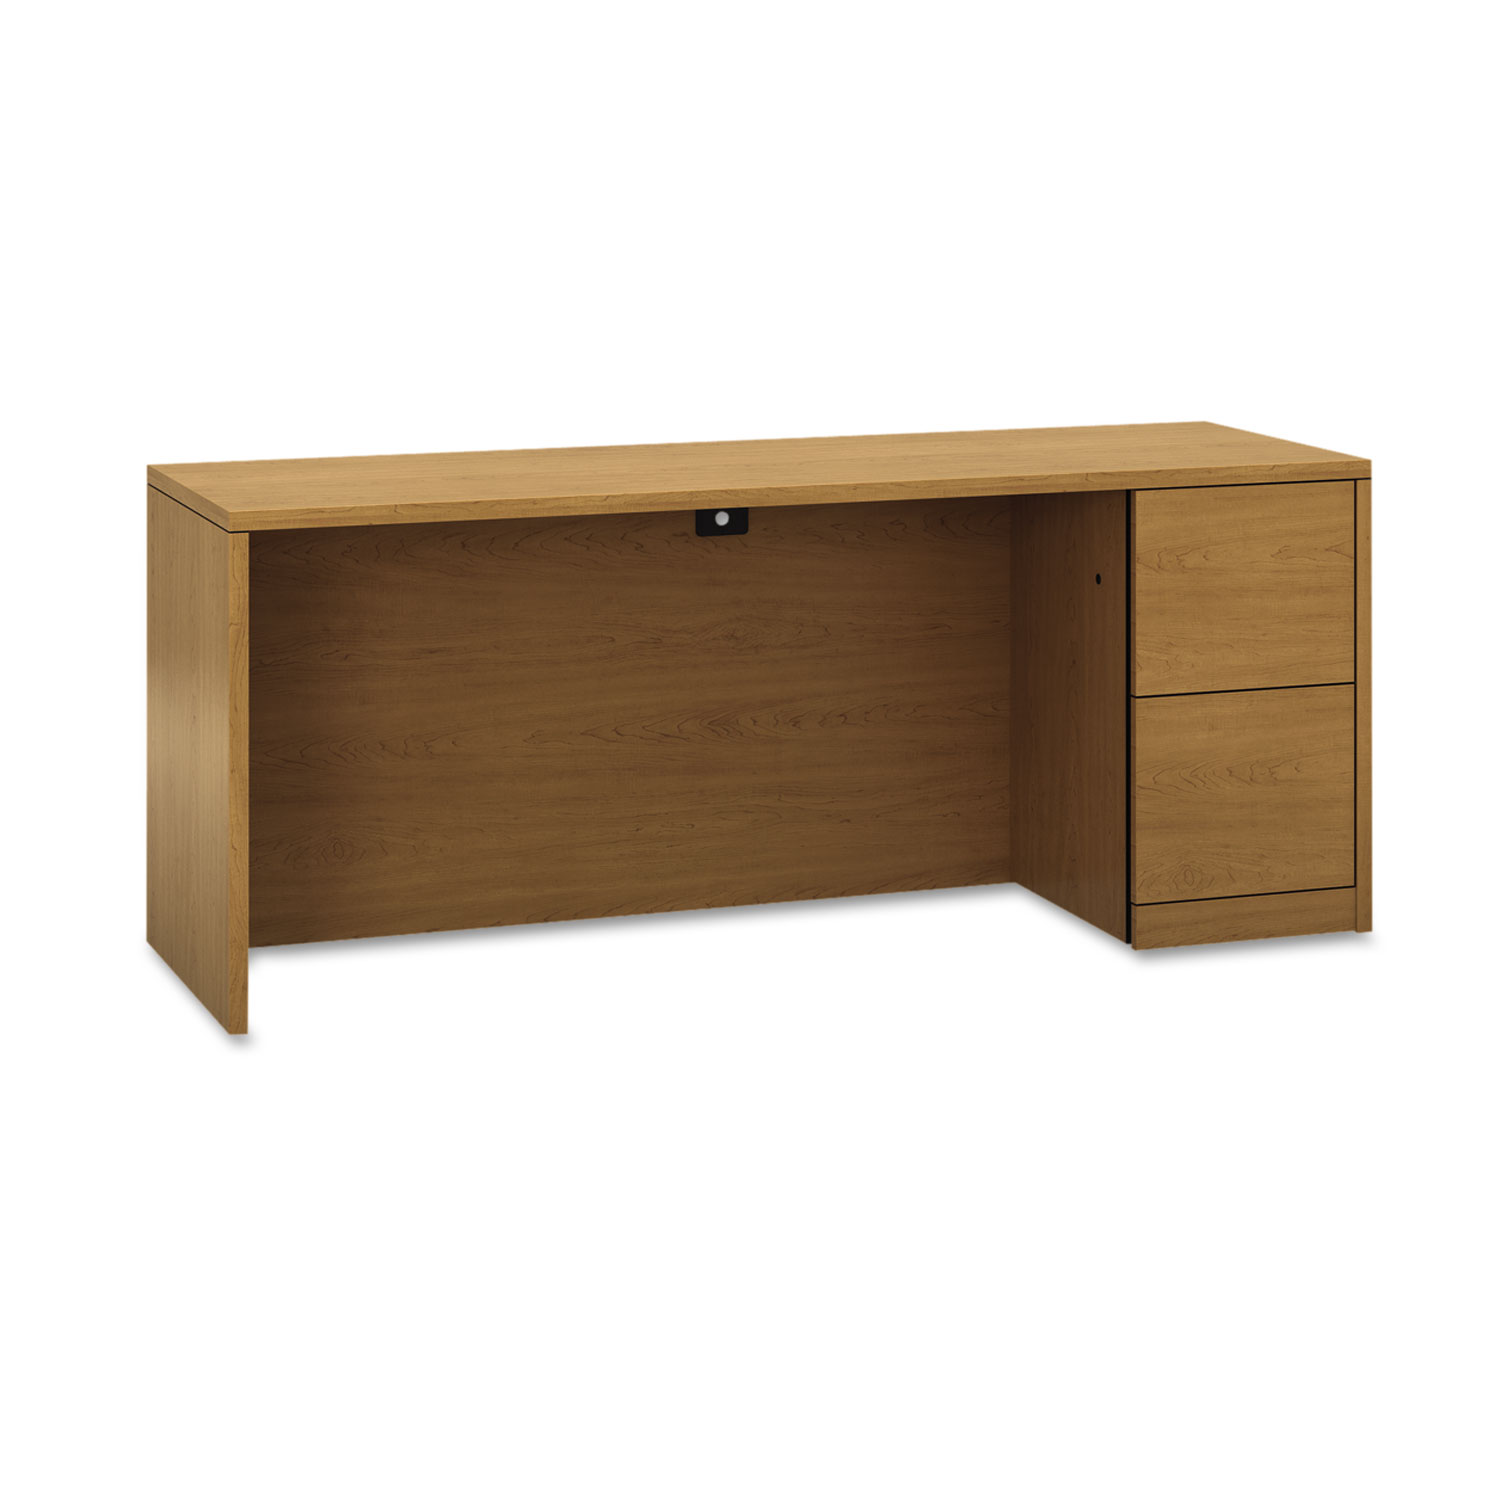 10500 Series Full-Height Right Pedestal Credenza, 72w x 24d x 29-1/2h, Harvest